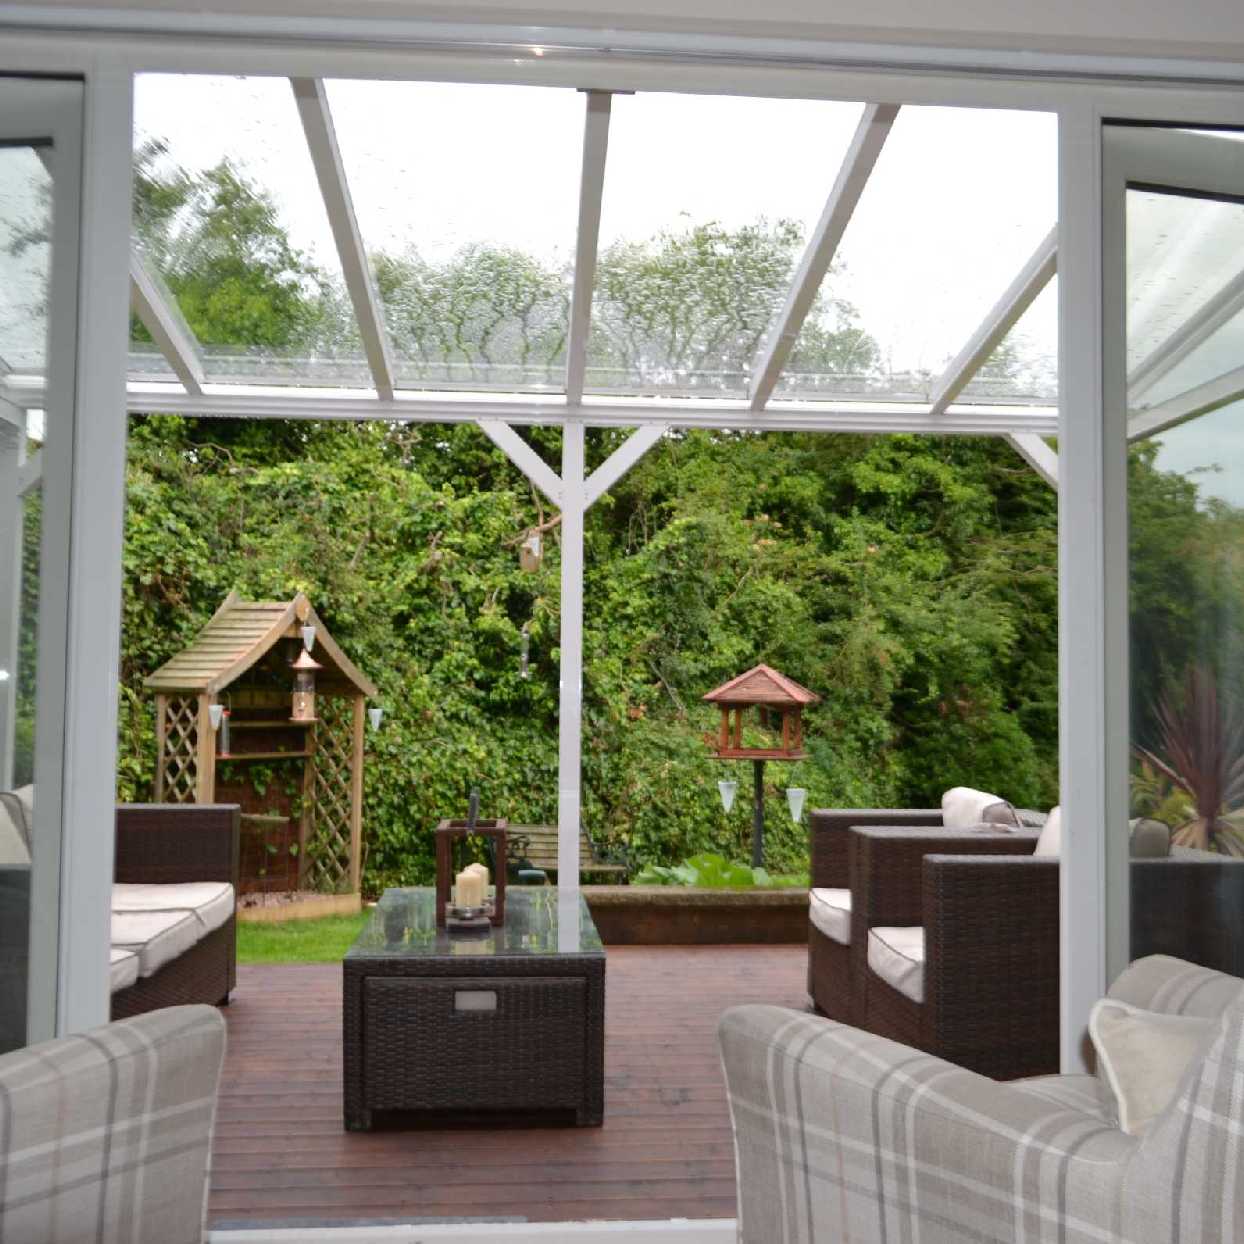 Great selection of Omega Smart Lean-To Canopy, White UNGLAZED for 6mm Glazing - 7.7m (W) x 1.5m (P), (4) Supporting Posts